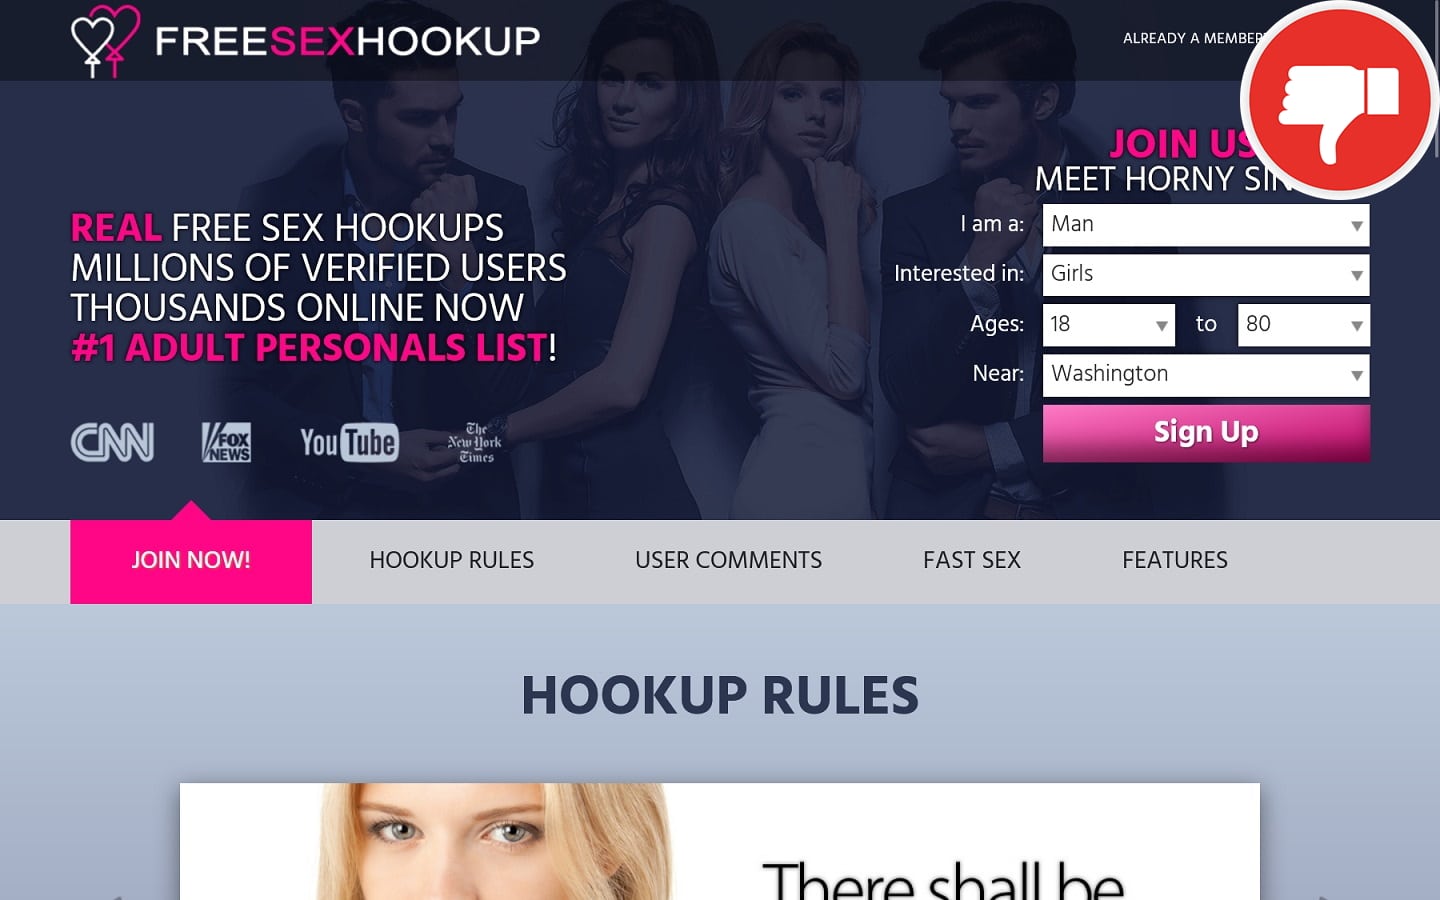 Review FreeSexHookup.com scam experience